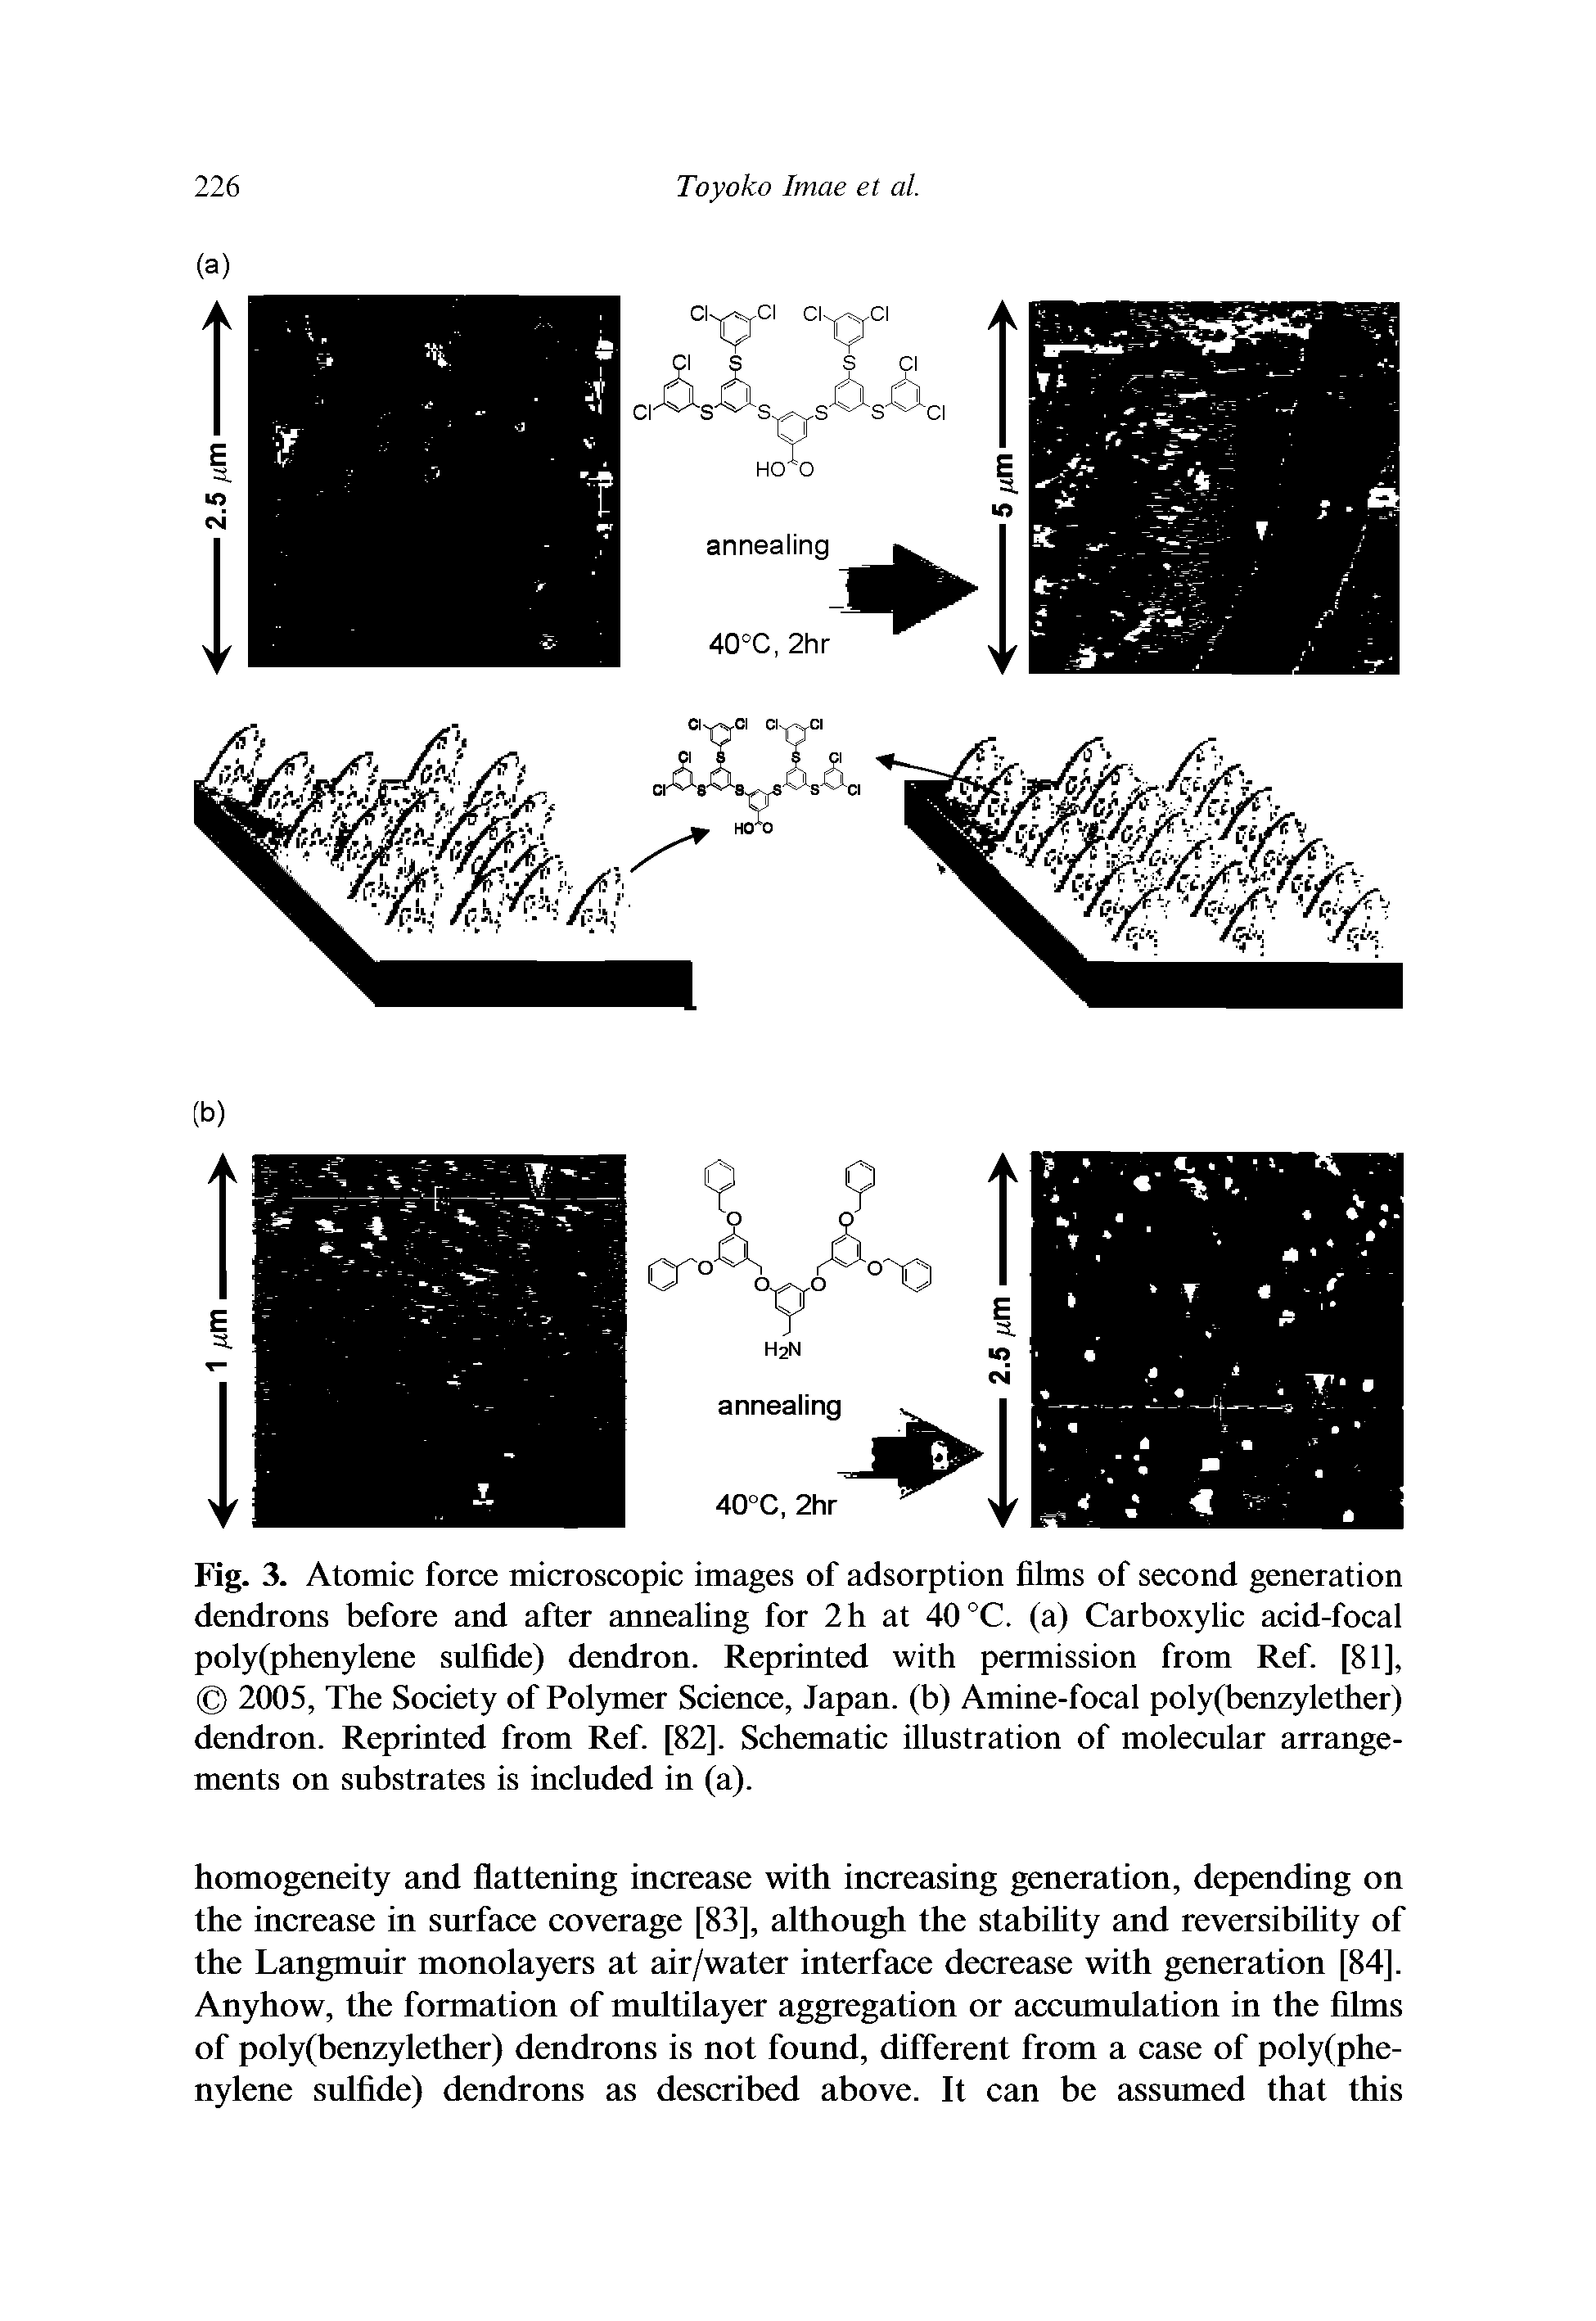 Fig. 3. Atomic force microscopic images of adsorption films of second generation dendrons before and after annealing for 2h at 40 °C. (a) Carboxylic acid-focal poly(phenylene sulfide) dendron. Reprinted with permission from Ref. [81], 2005, The Society of Polymer Science, Japan, (b) Amine-focal poly(benzylether) dendron. Reprinted from Ref. [82]. Schematic illustration of molecular arrangements on substrates is included in (a).